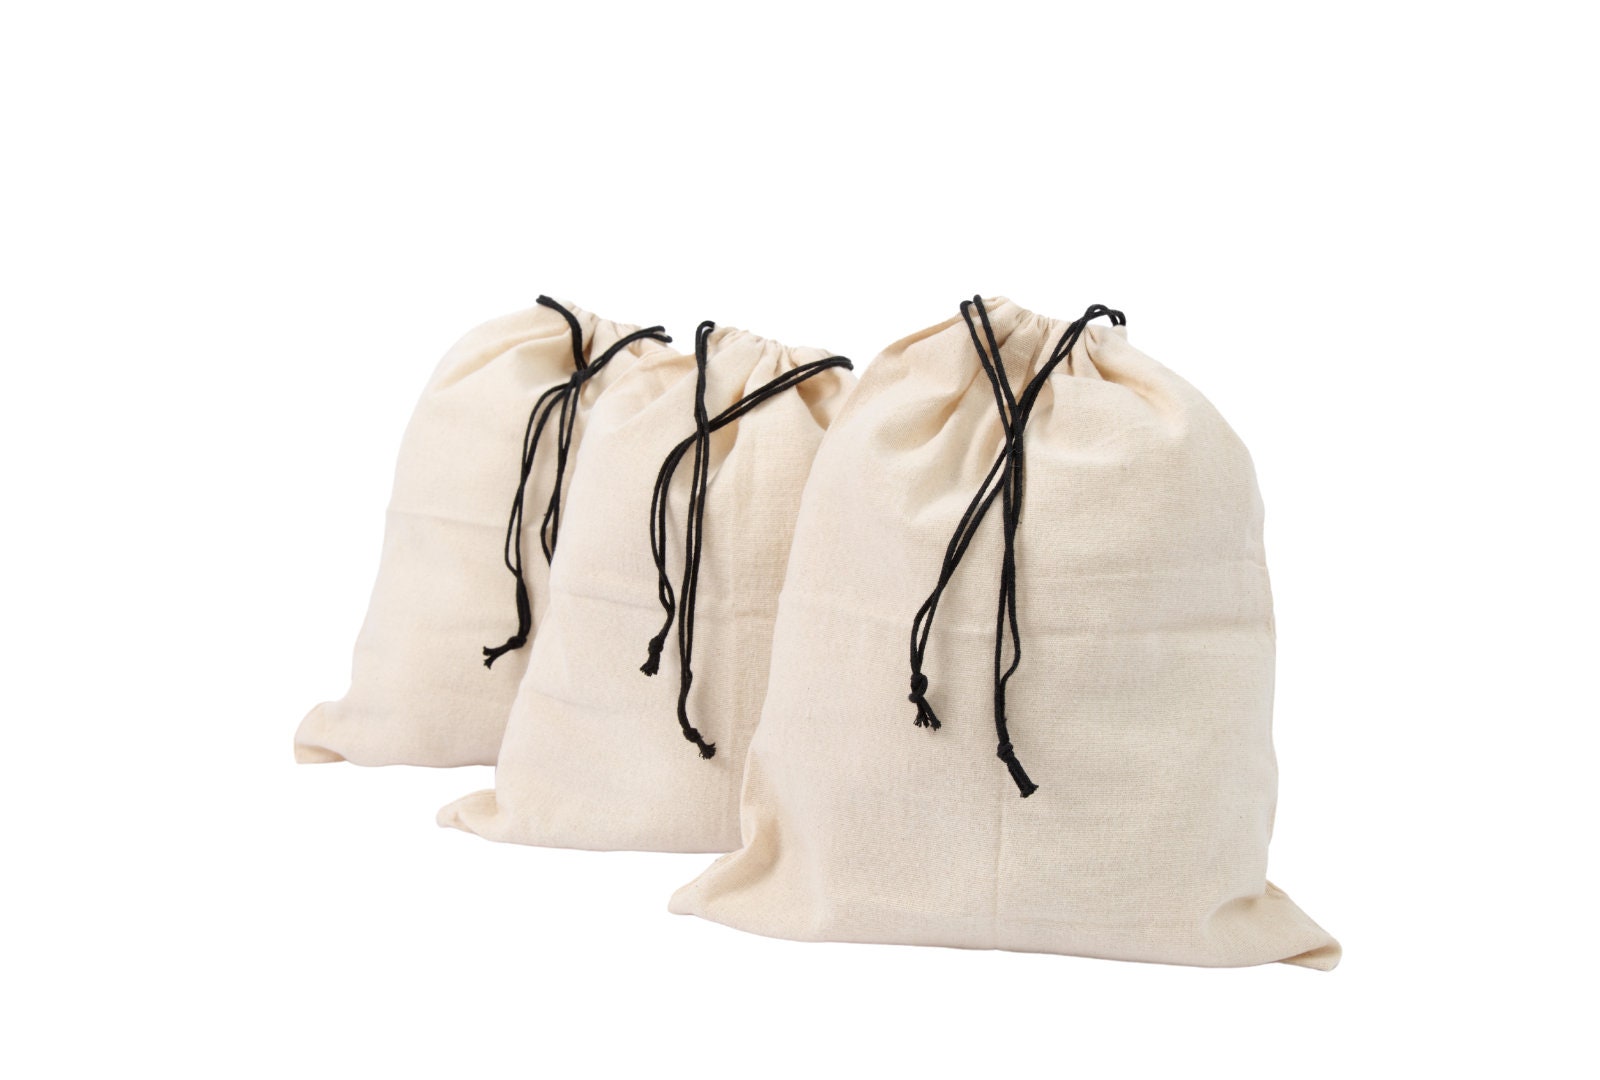 Celestial Gifts Muslin Bags with Drawstring 50pcs - 6 x 8 100% Cotton -  Made in USA - Canvas Bags Bulk, Small Drawstring Bags, Cotton Muslin Bags